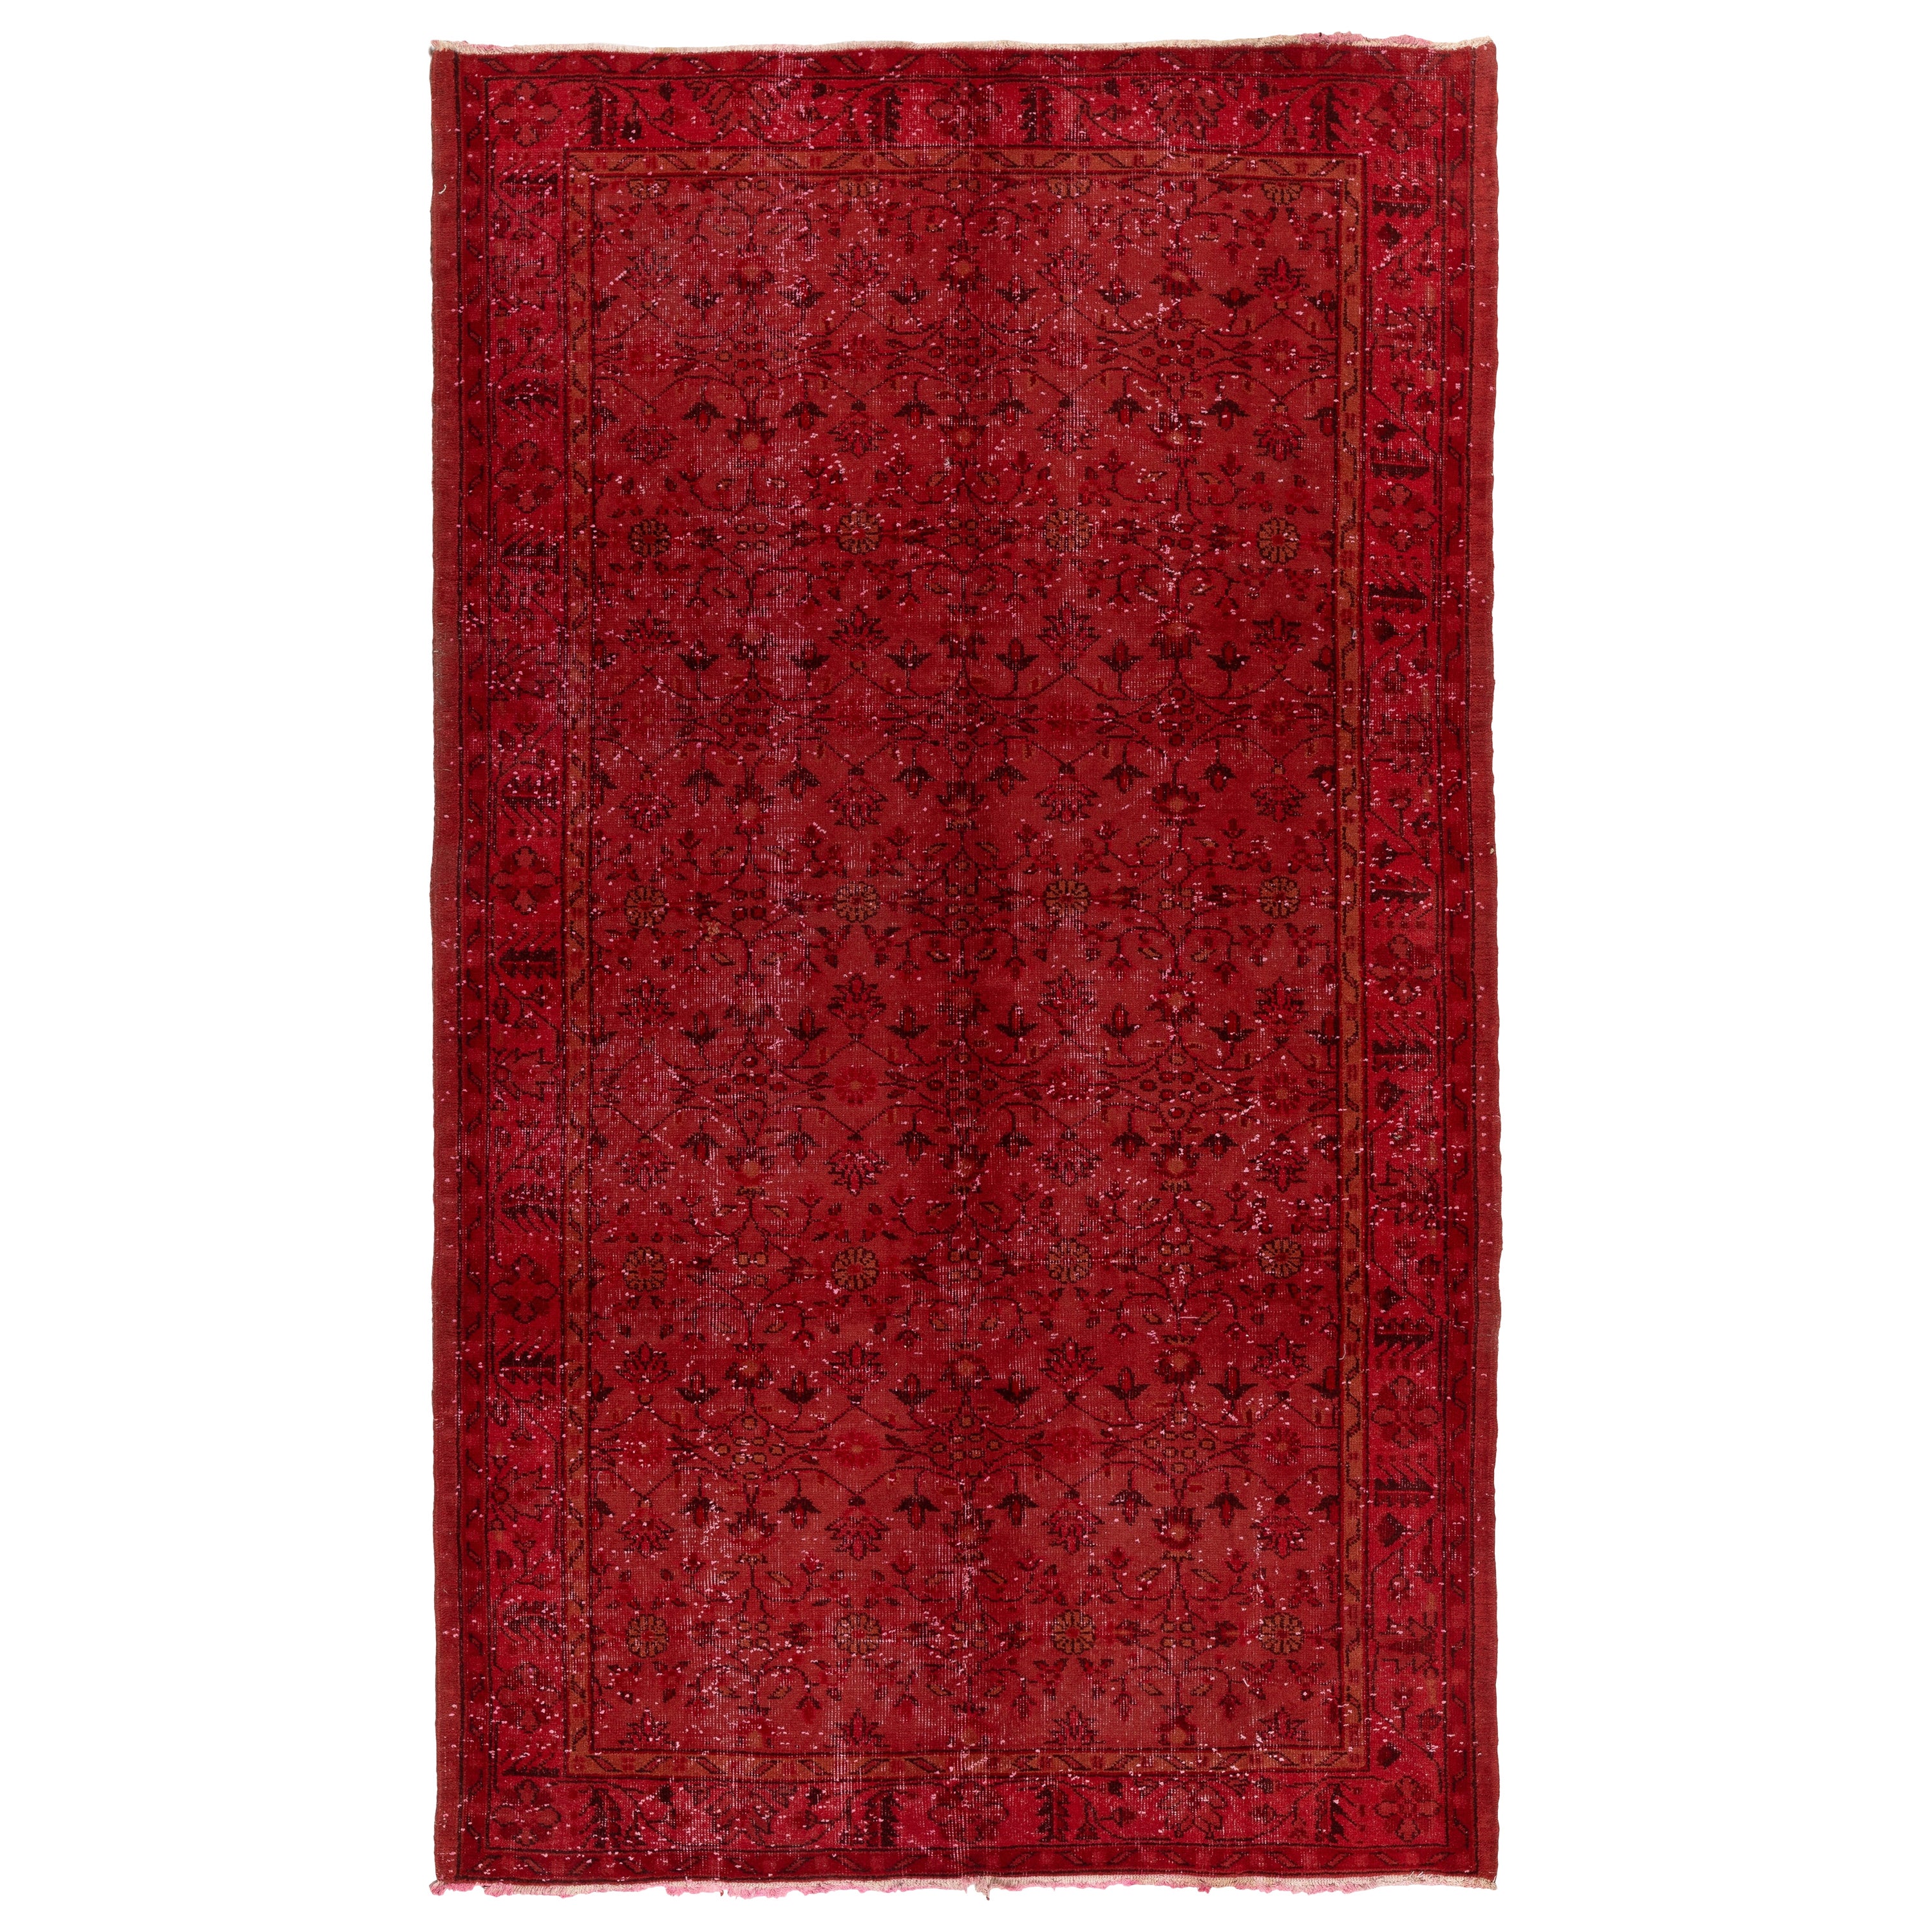 5.6x9.2 Ft Modern Home Decor Handmade Anatolian Rug in Red with Floral Design For Sale